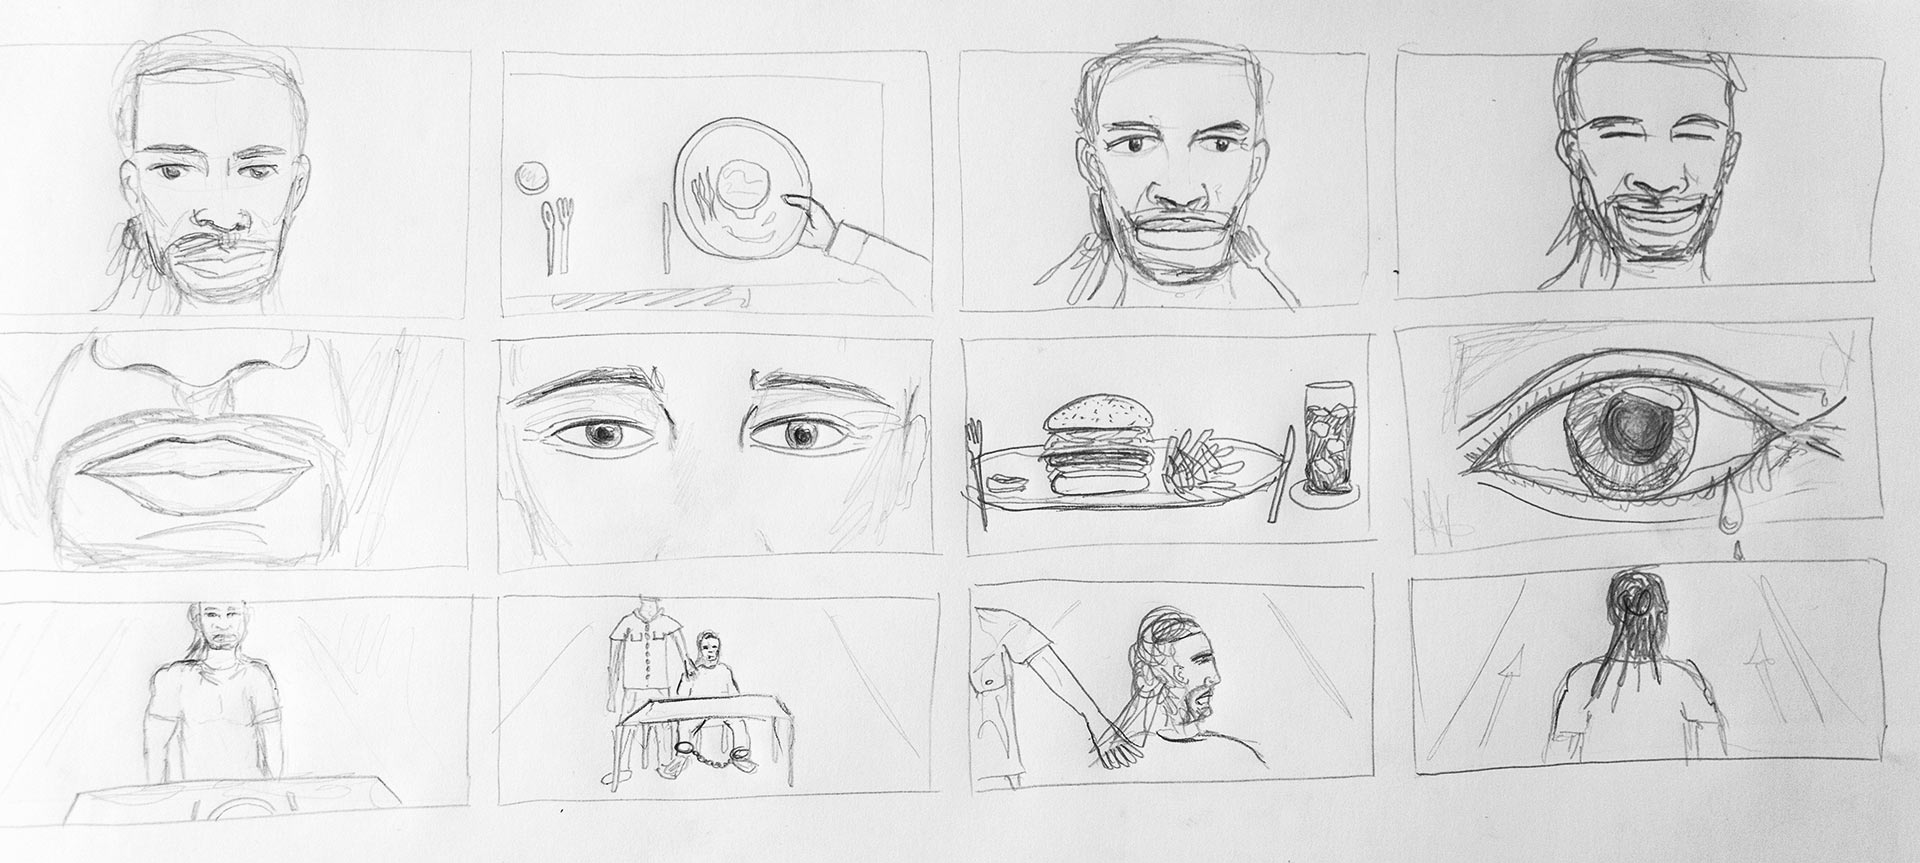 A storyboard sketch showing some of my envisioned shots.